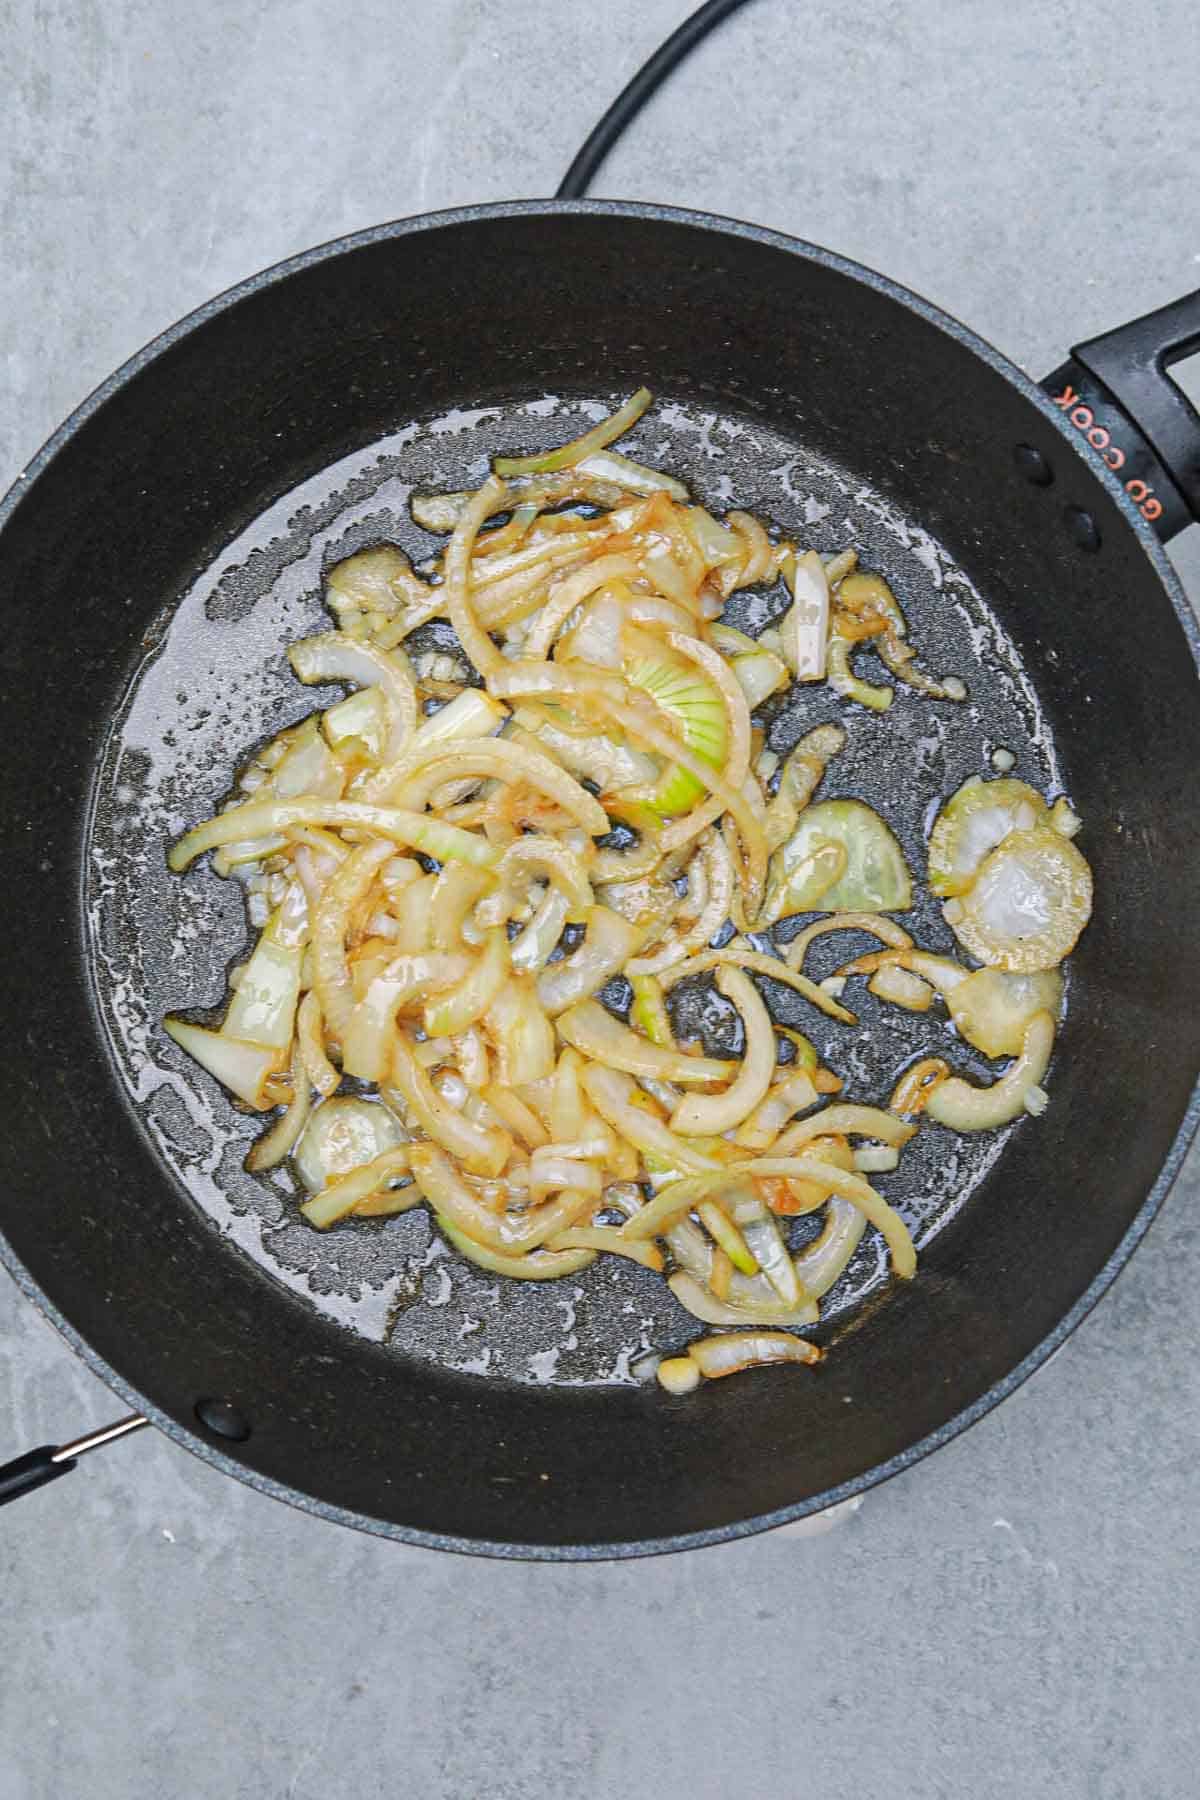 sauteed onions and garlic in the skillet.